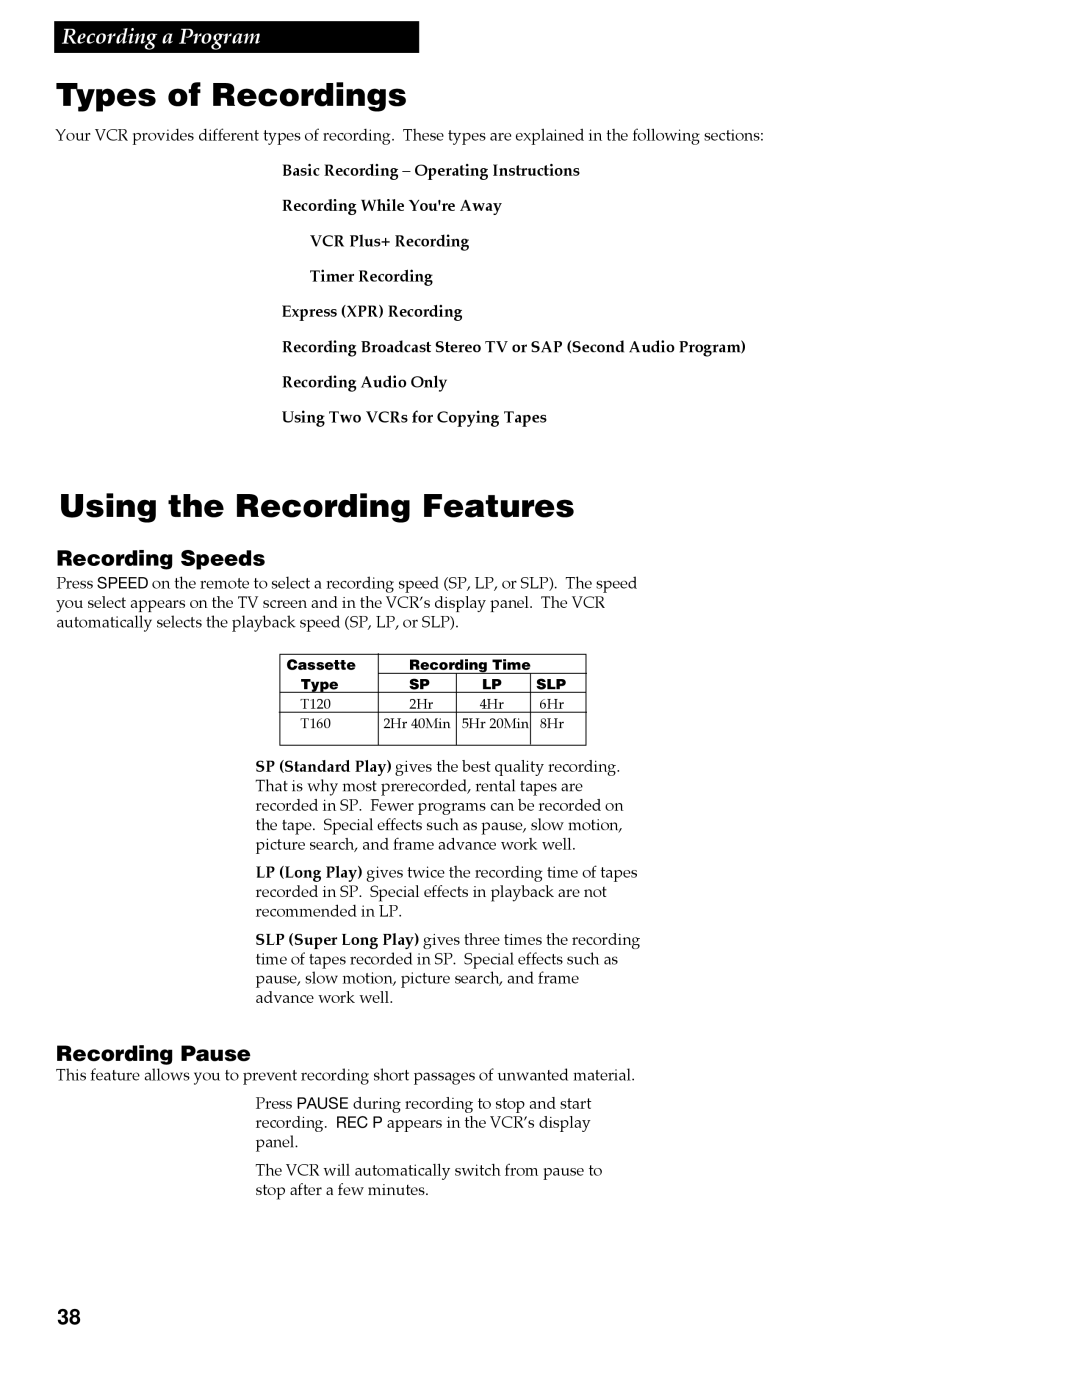 RCA VR688HF manual Types of Recordings, Using the Recording Features, Recording Speeds, Recording Pause 